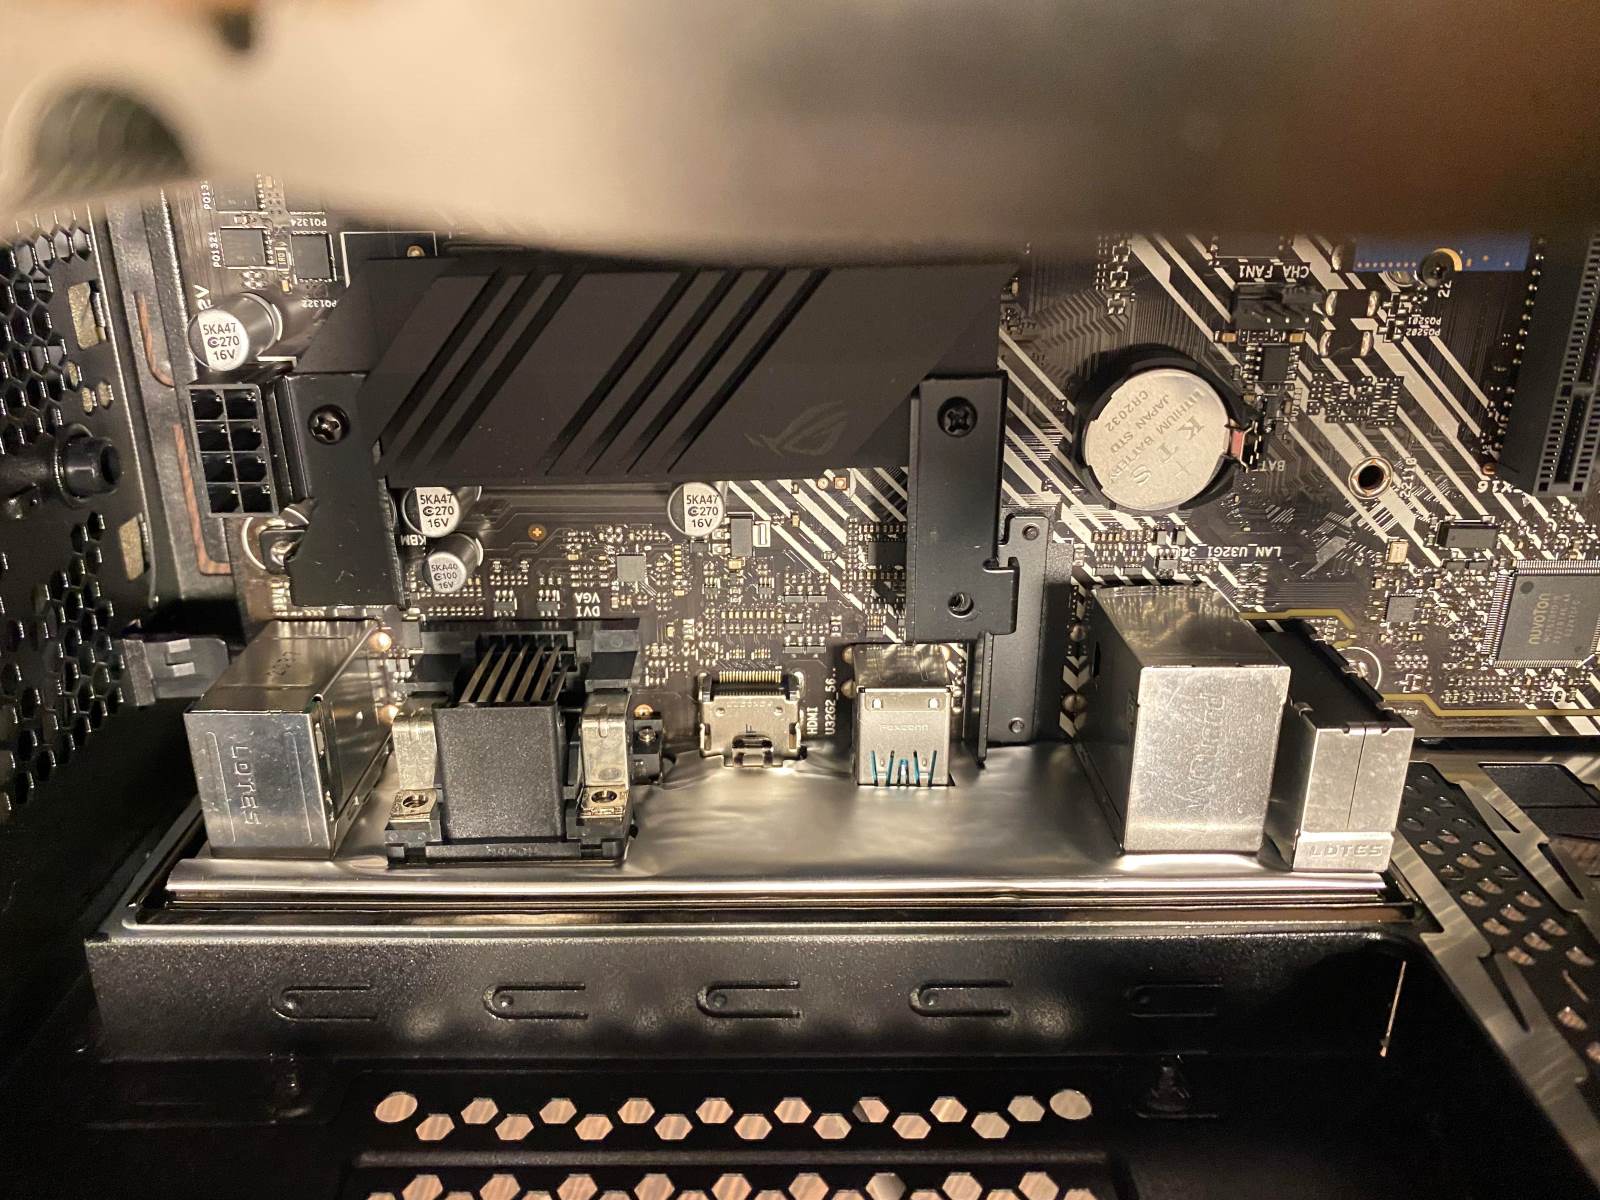 How To Remove Motherboard